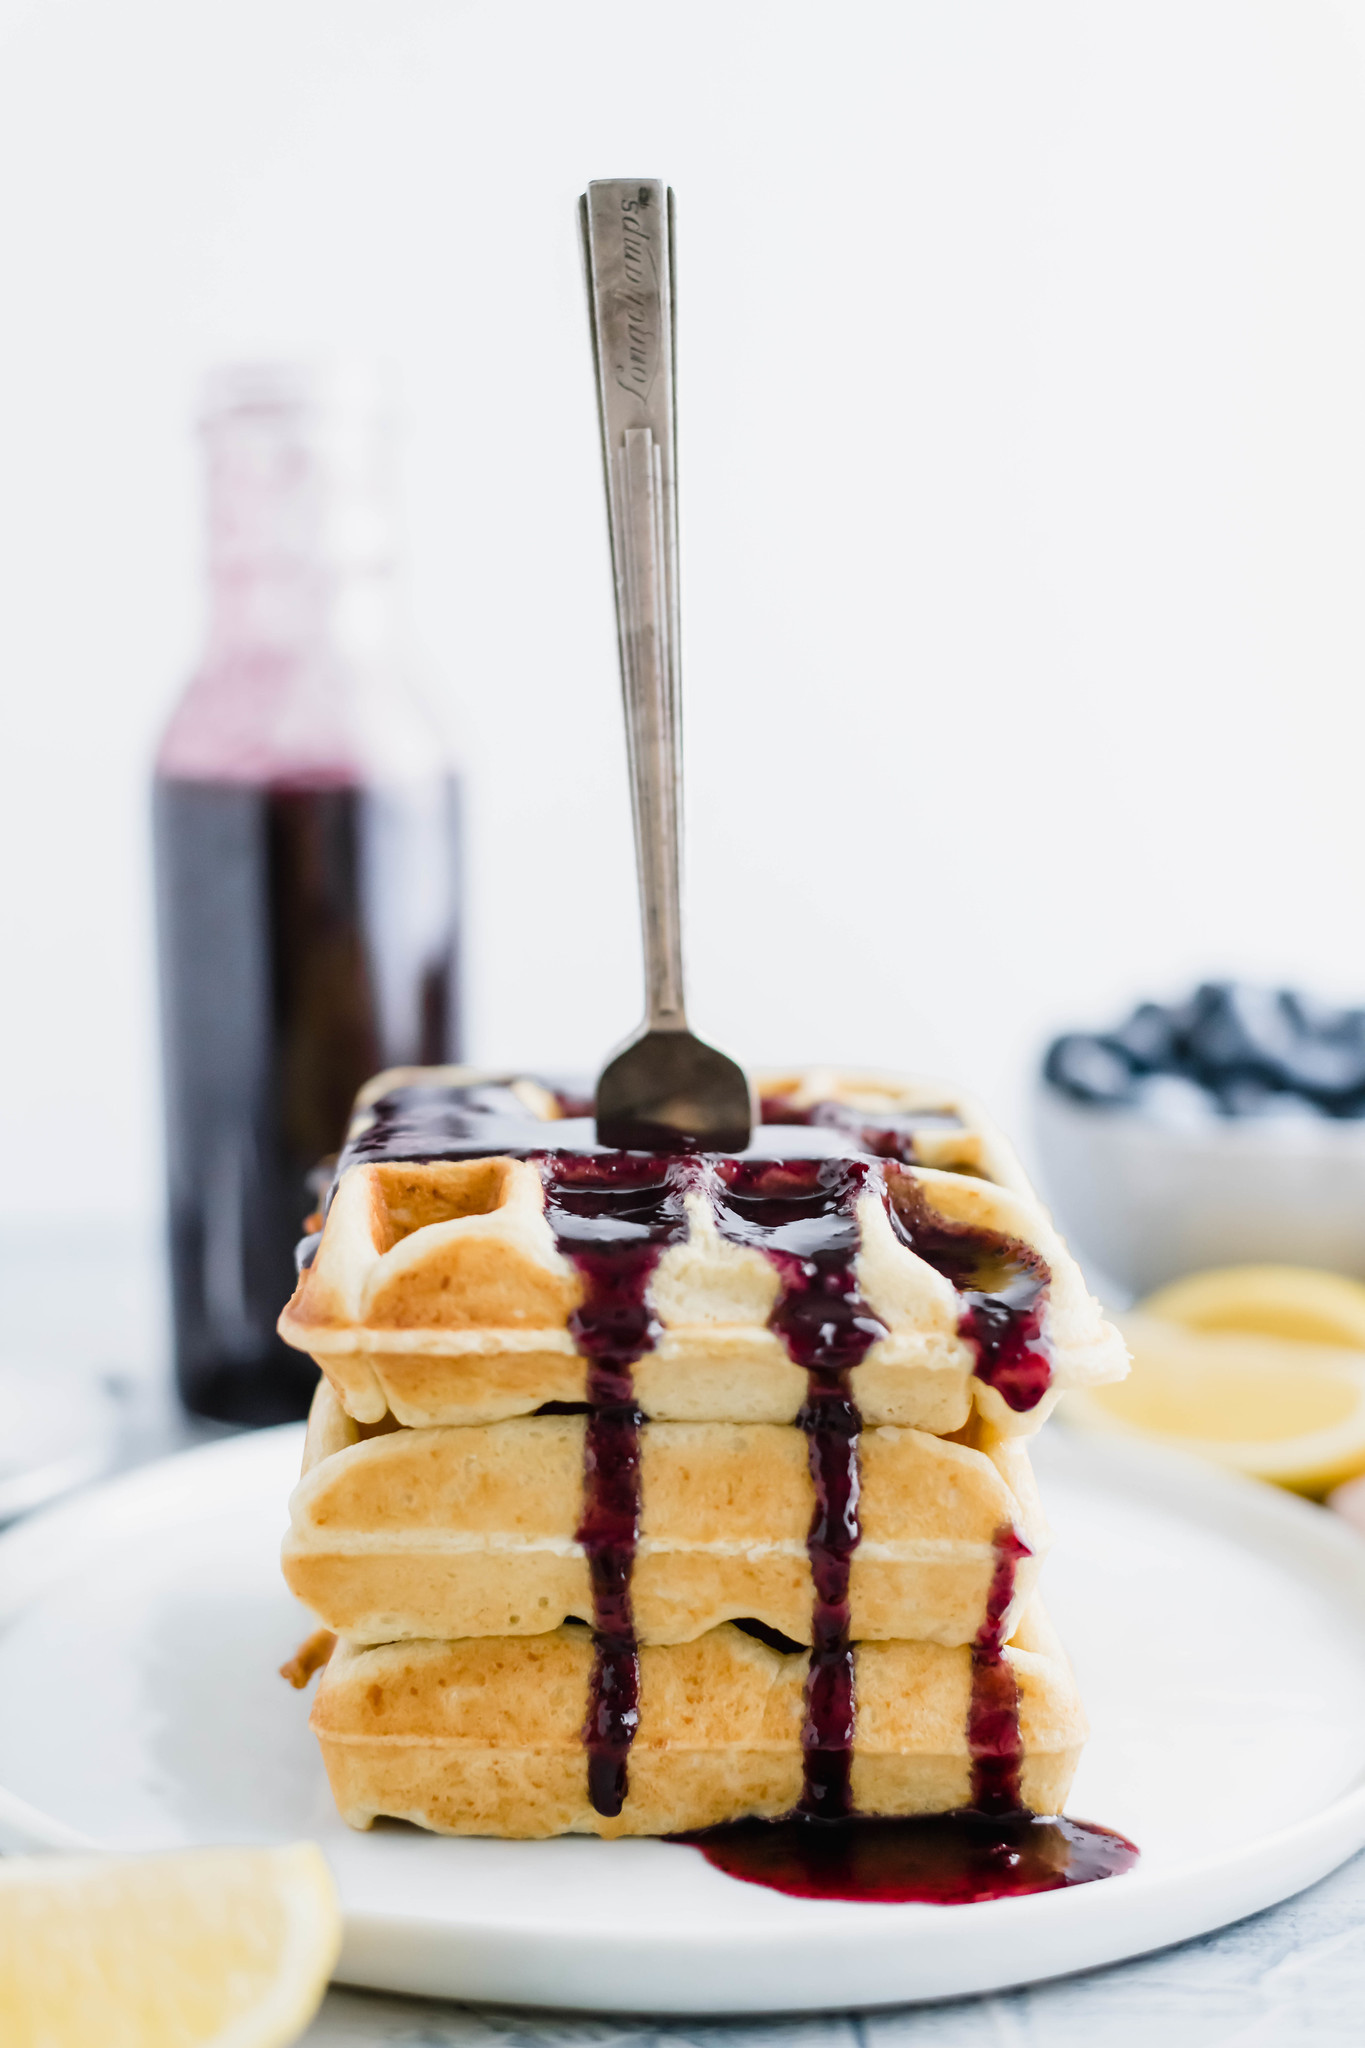 Three lemon ricotta waffles stacked on a white plate with blueberry sryup on top and dripping down. Fork stuck into the stack. Bottle of blueberry syrup in upper left corner. Bowl of blueberries in upper right corner.